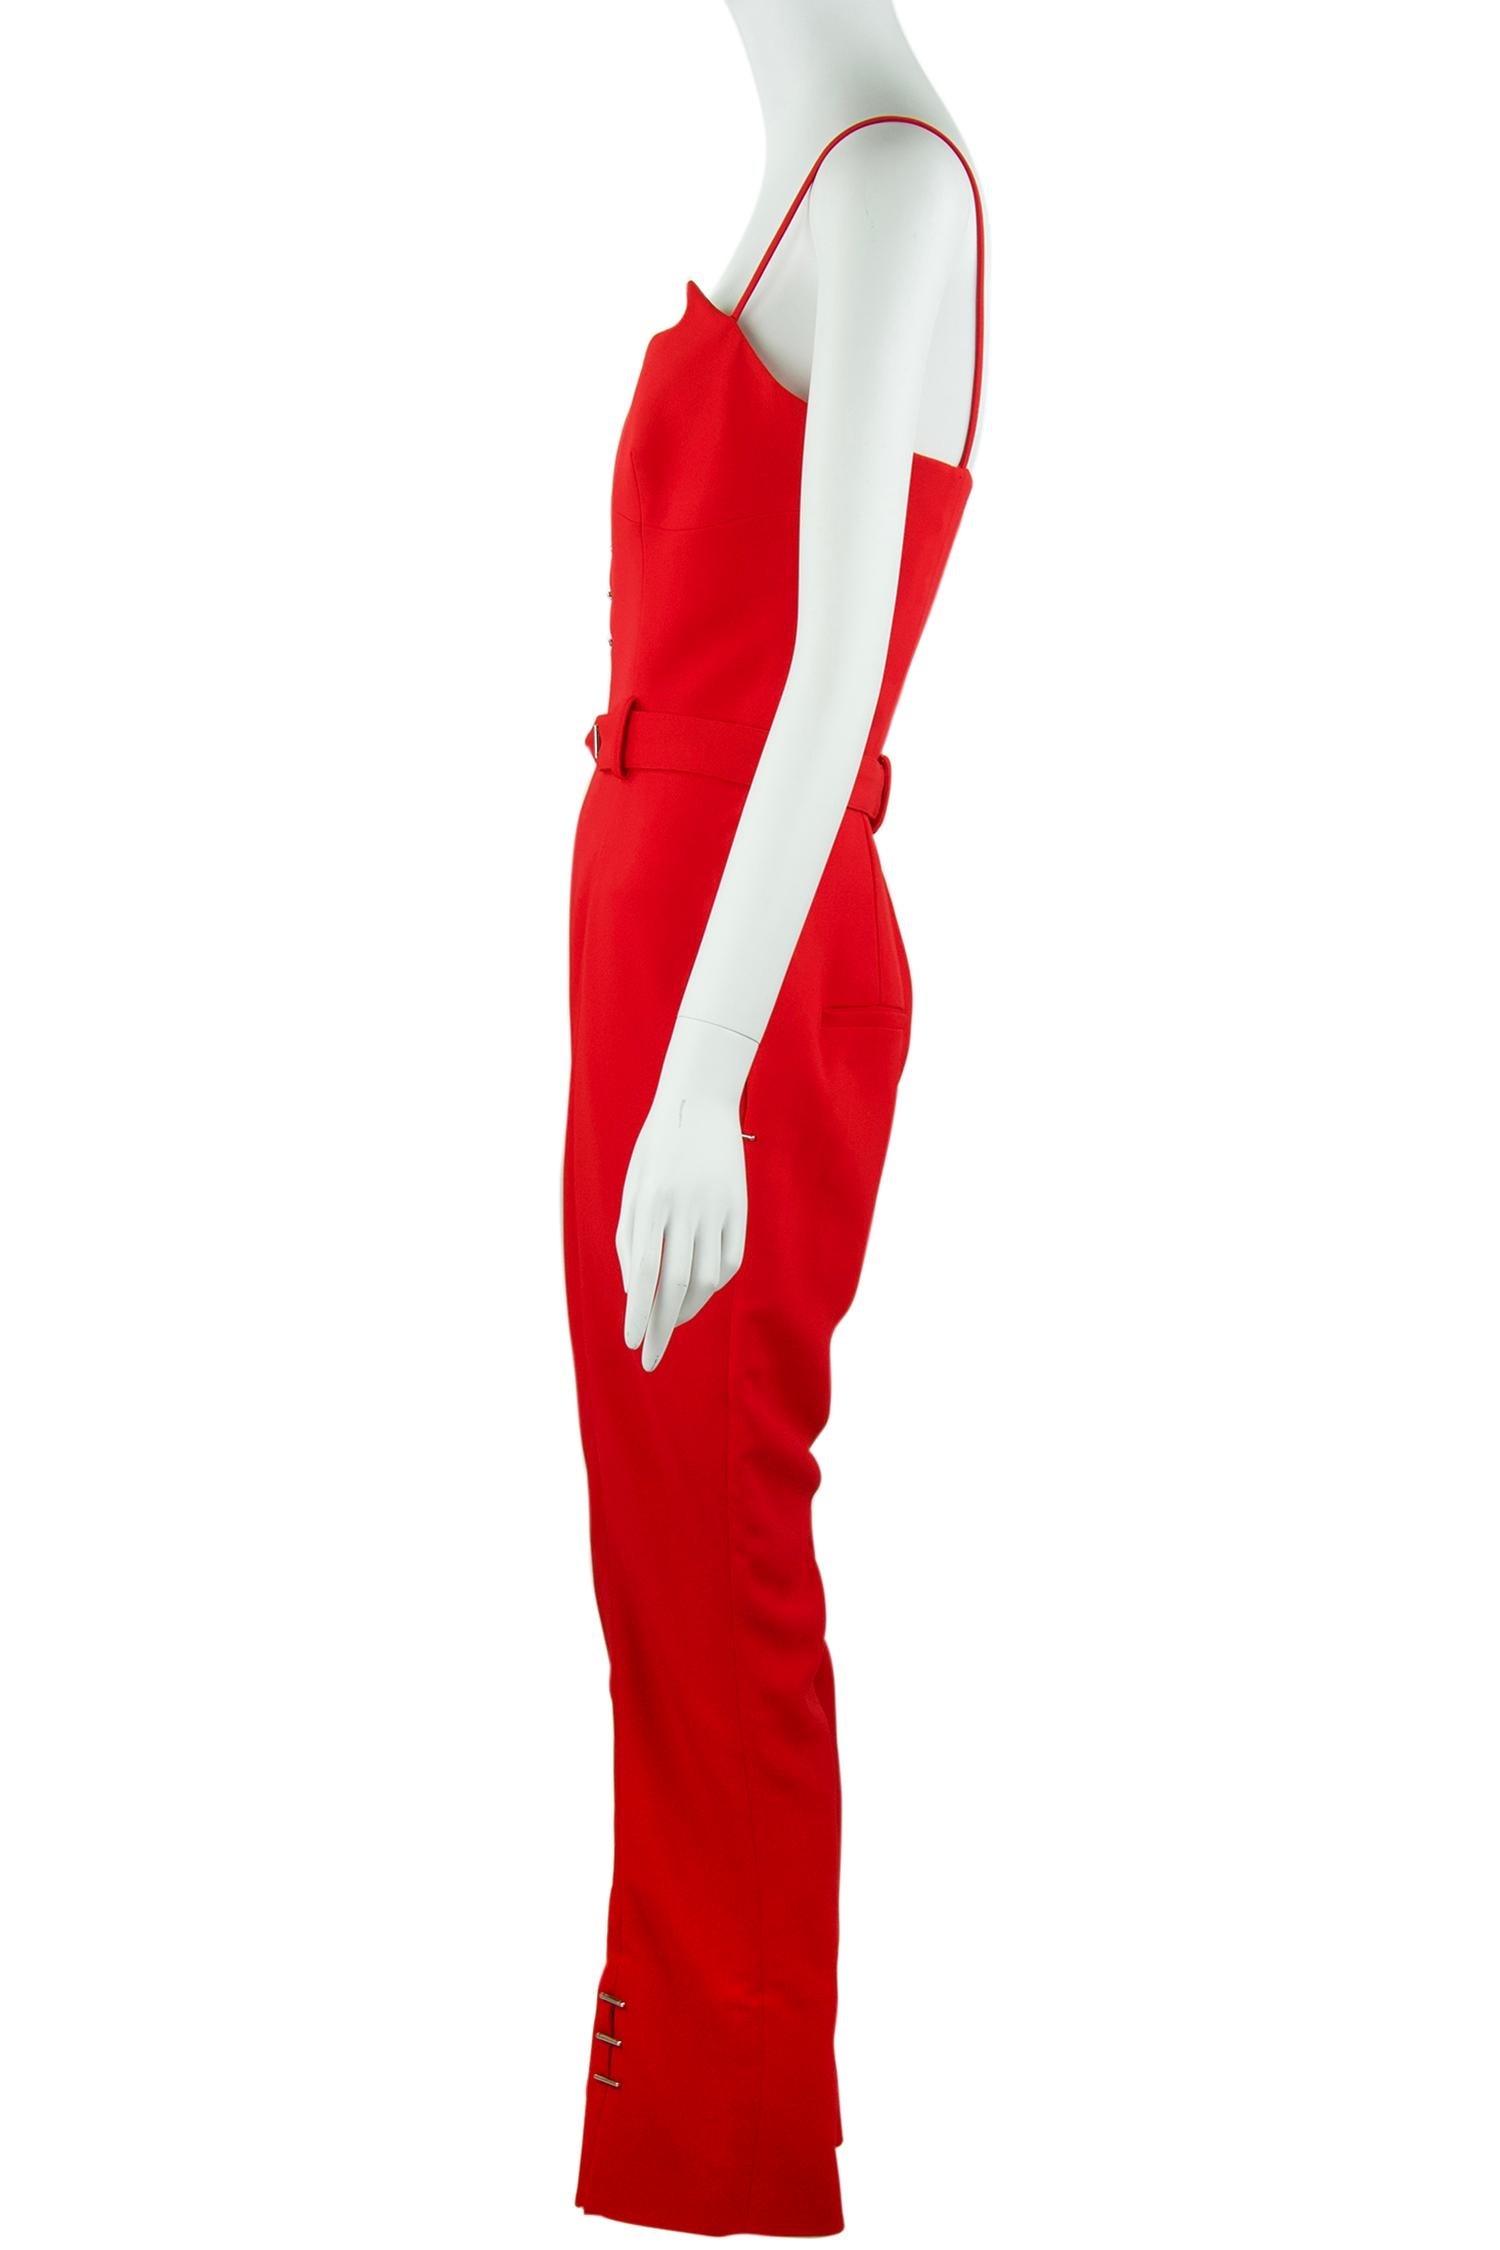 Classic and sexy red Mugler jumpsuit with silver hardware detail and spaghetti straps.  Very sexy look for a night out on the town.

Size: FR 38

Condition: New with tags

Composition: 51% viscose, 46% acetate, 3% elastane / lining 57% viscose, 43%